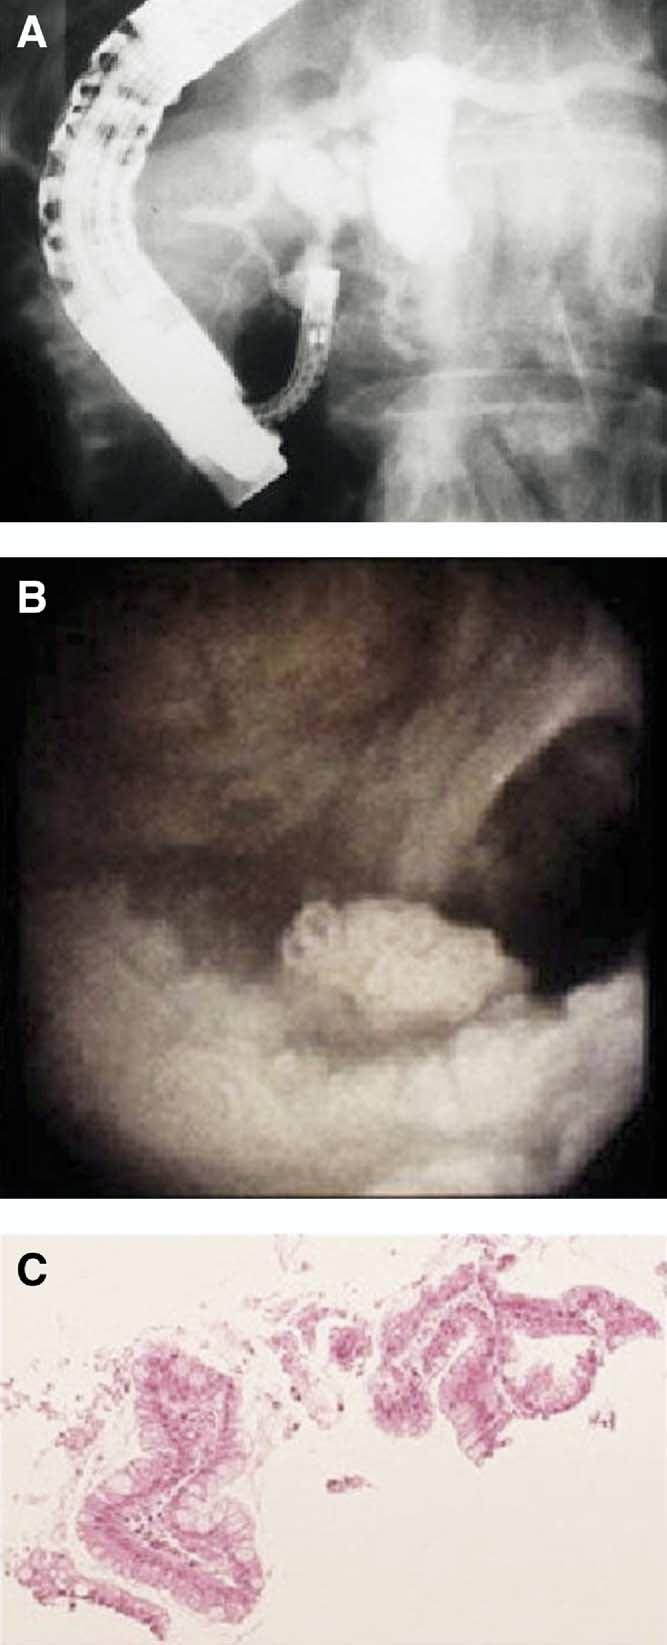 S56 YASUDA ET AL CLINICAL GASTROENTEROLOGY AND HEPATOLOGY Vol. 3, No. 7 Figure 2. A case of adenoma in IPMT.